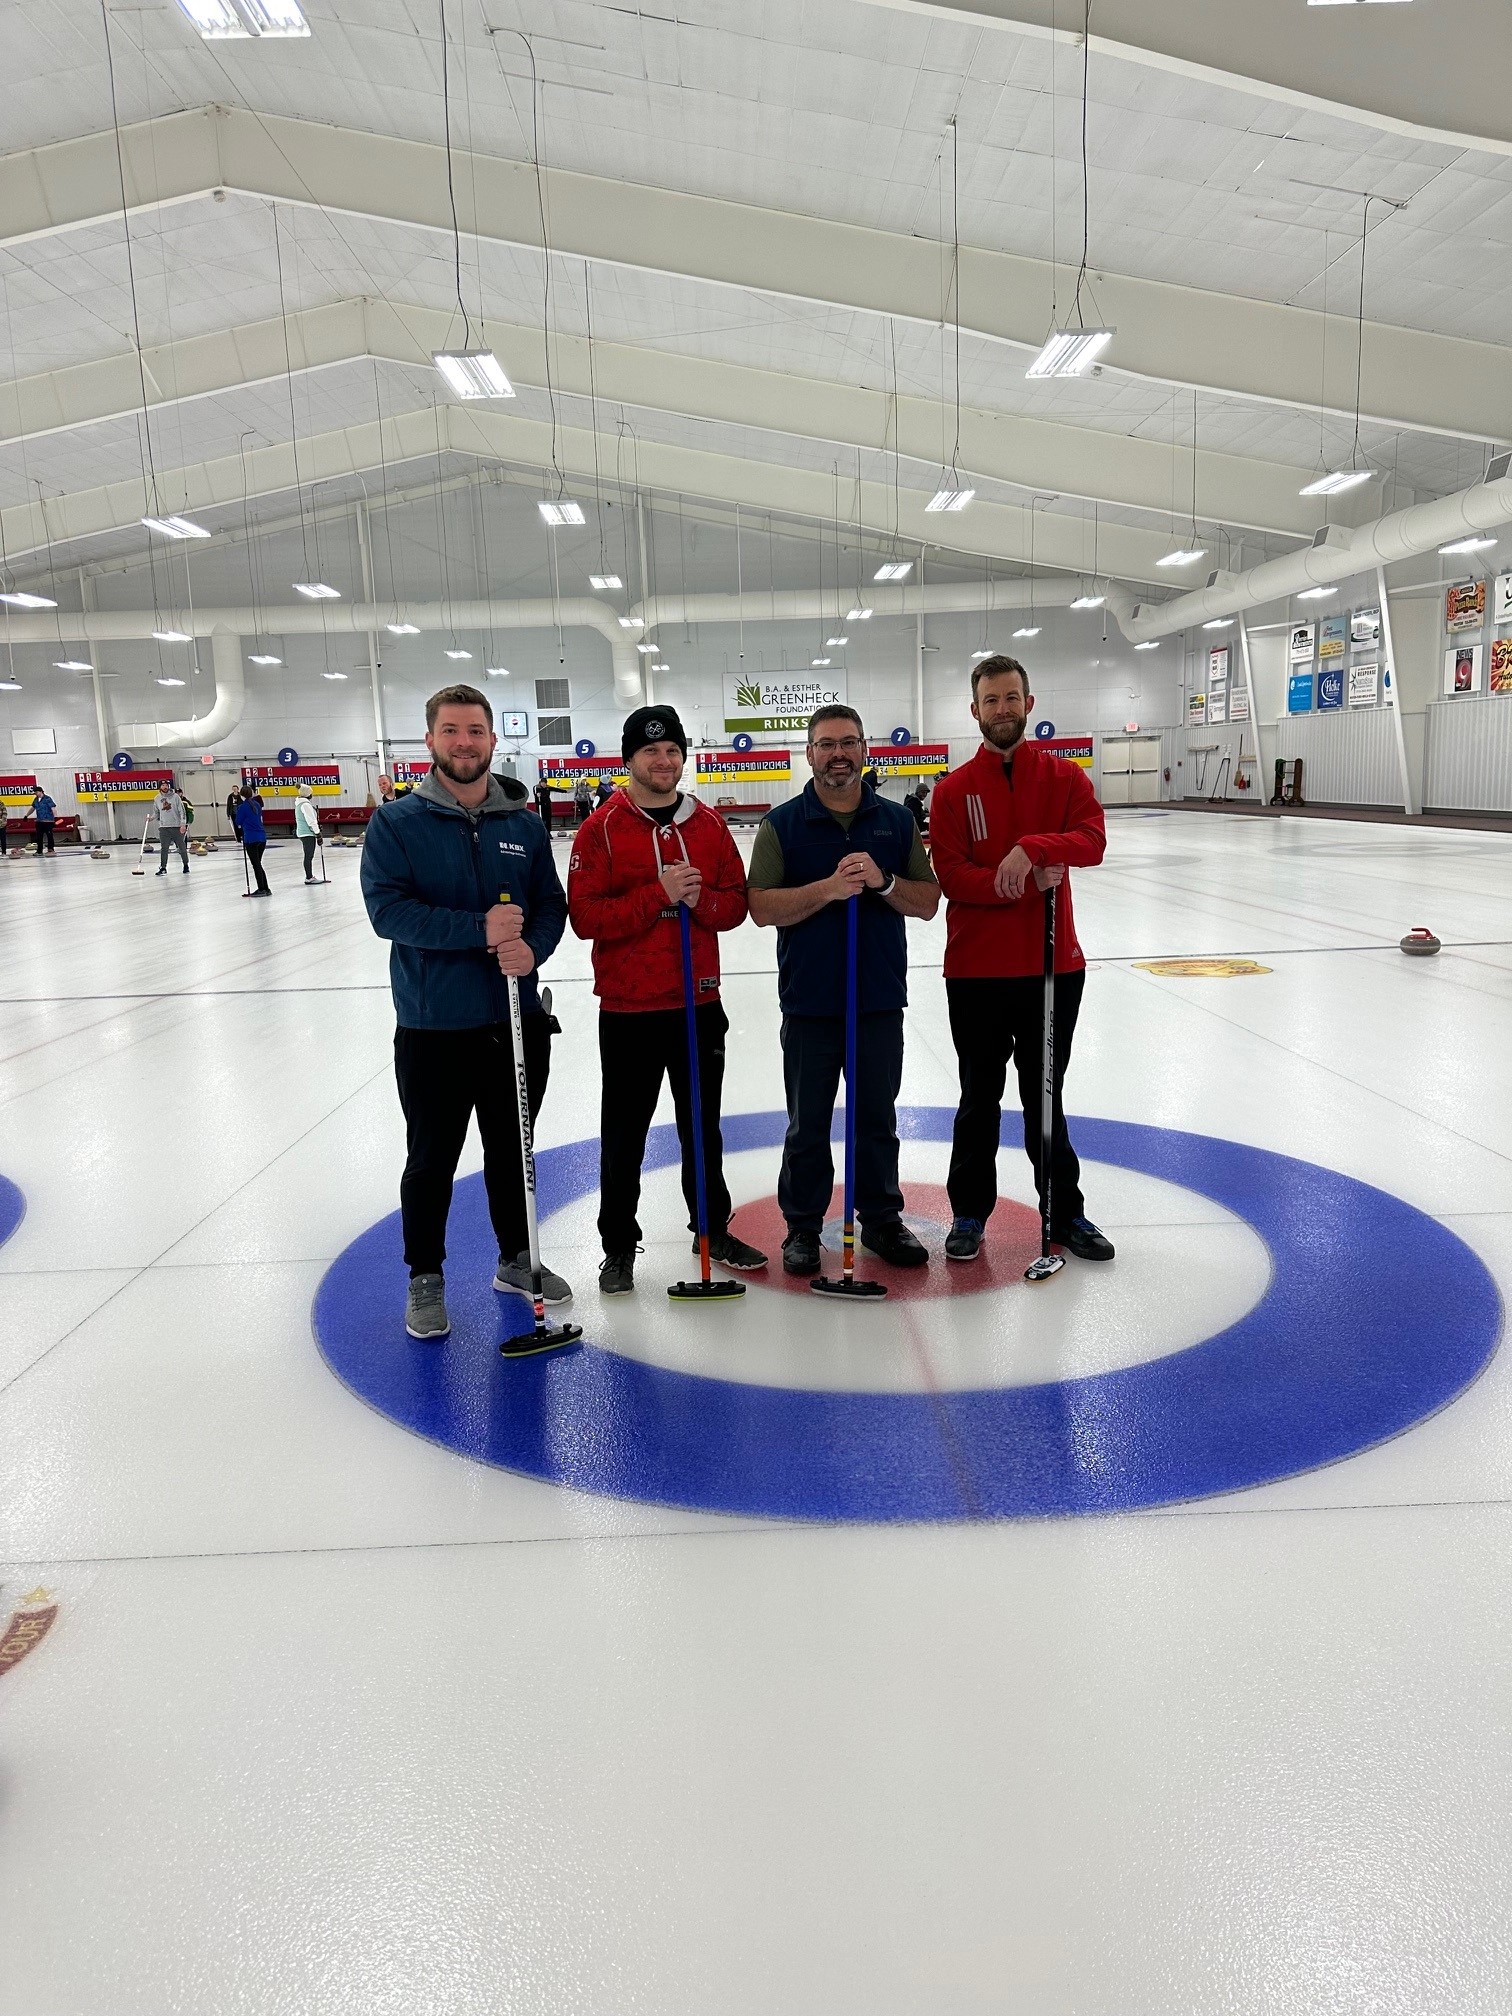 This image shows four men with curling brooms standing in the middle of a curling "house" on a sheet of ice